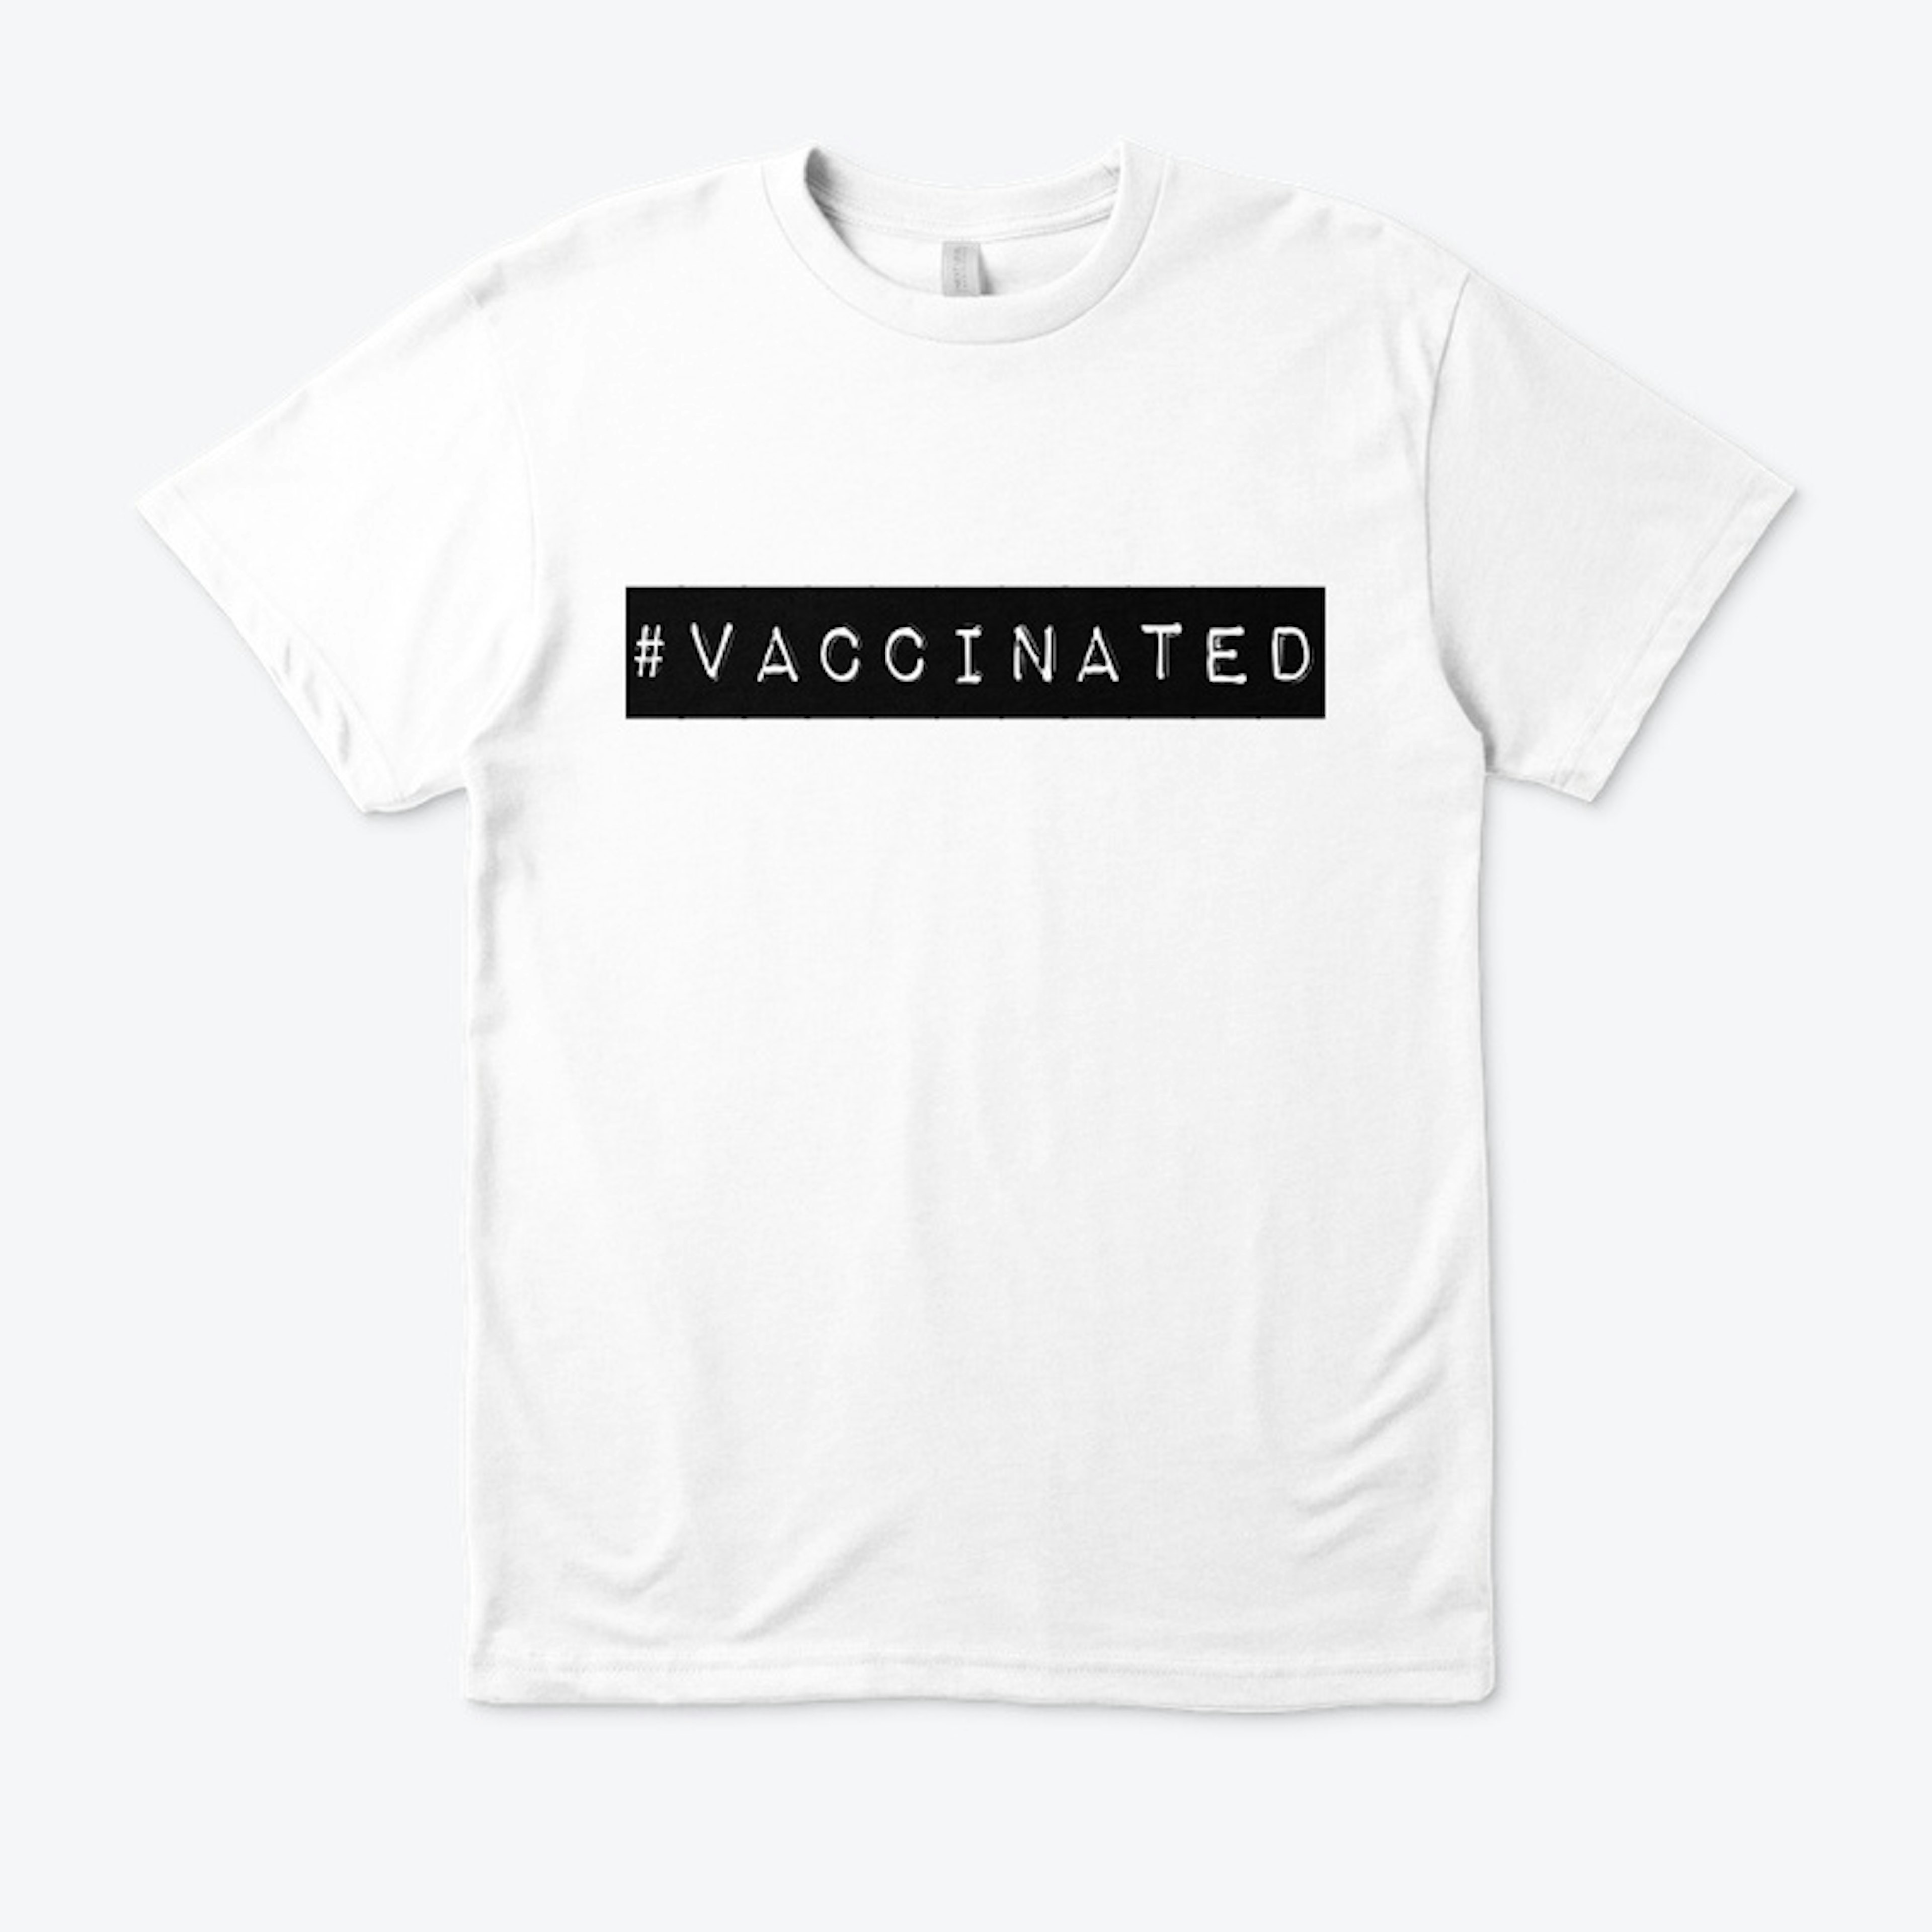 #VACCINATED